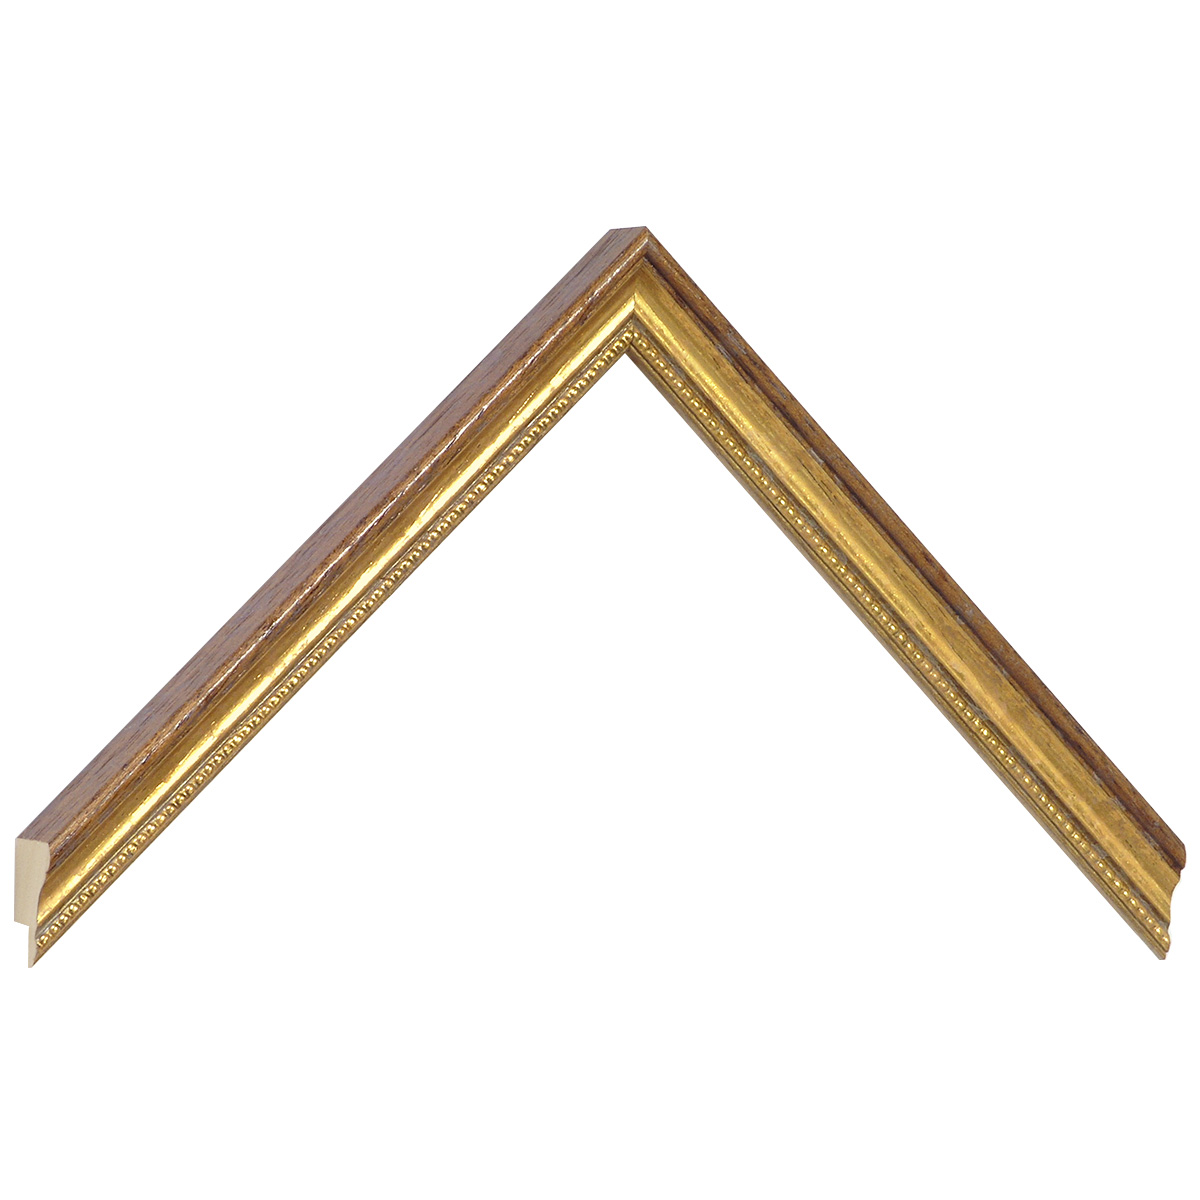 Moulding ayous width mm15 heigth 18 - Walnut, gold band - Sample